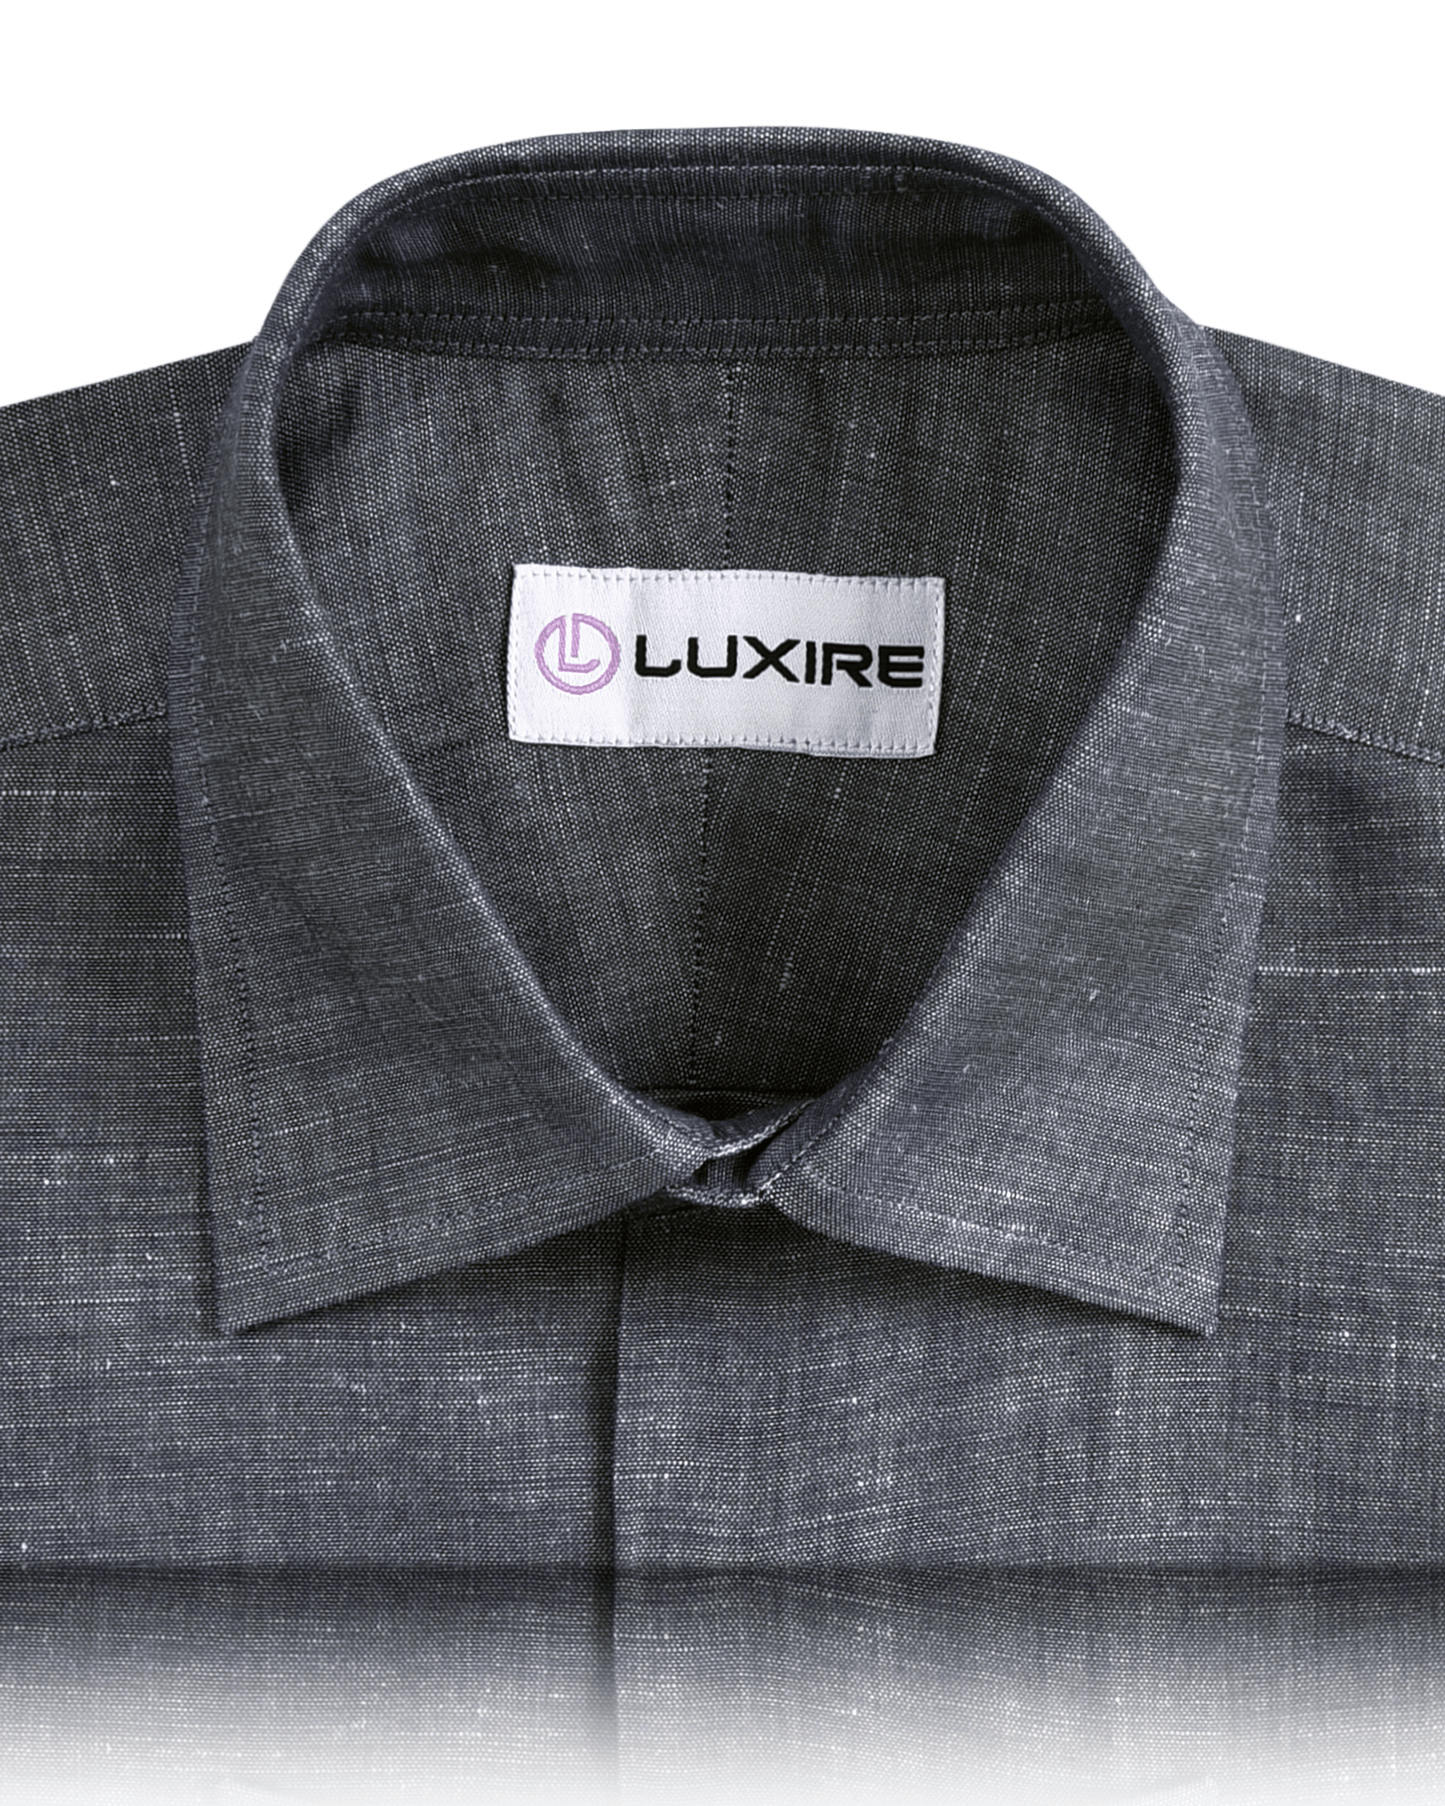 Collar of the custom linen shirt for men in greyish navy by Luxire Clothing